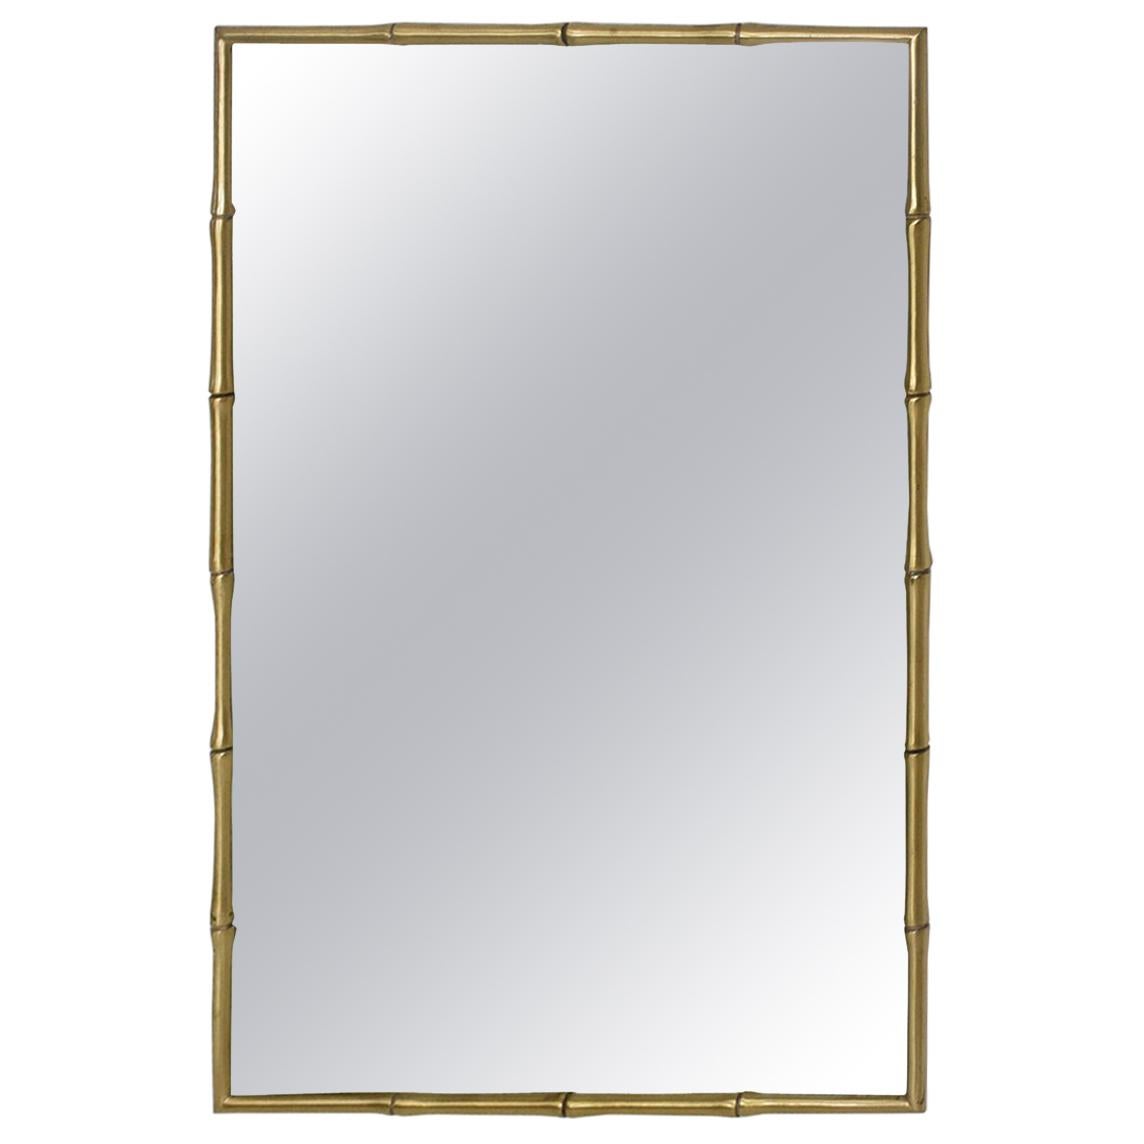 Regency Moderne Wall Mirror in Faux Bamboo Solid Brass Style James Mont 1960s